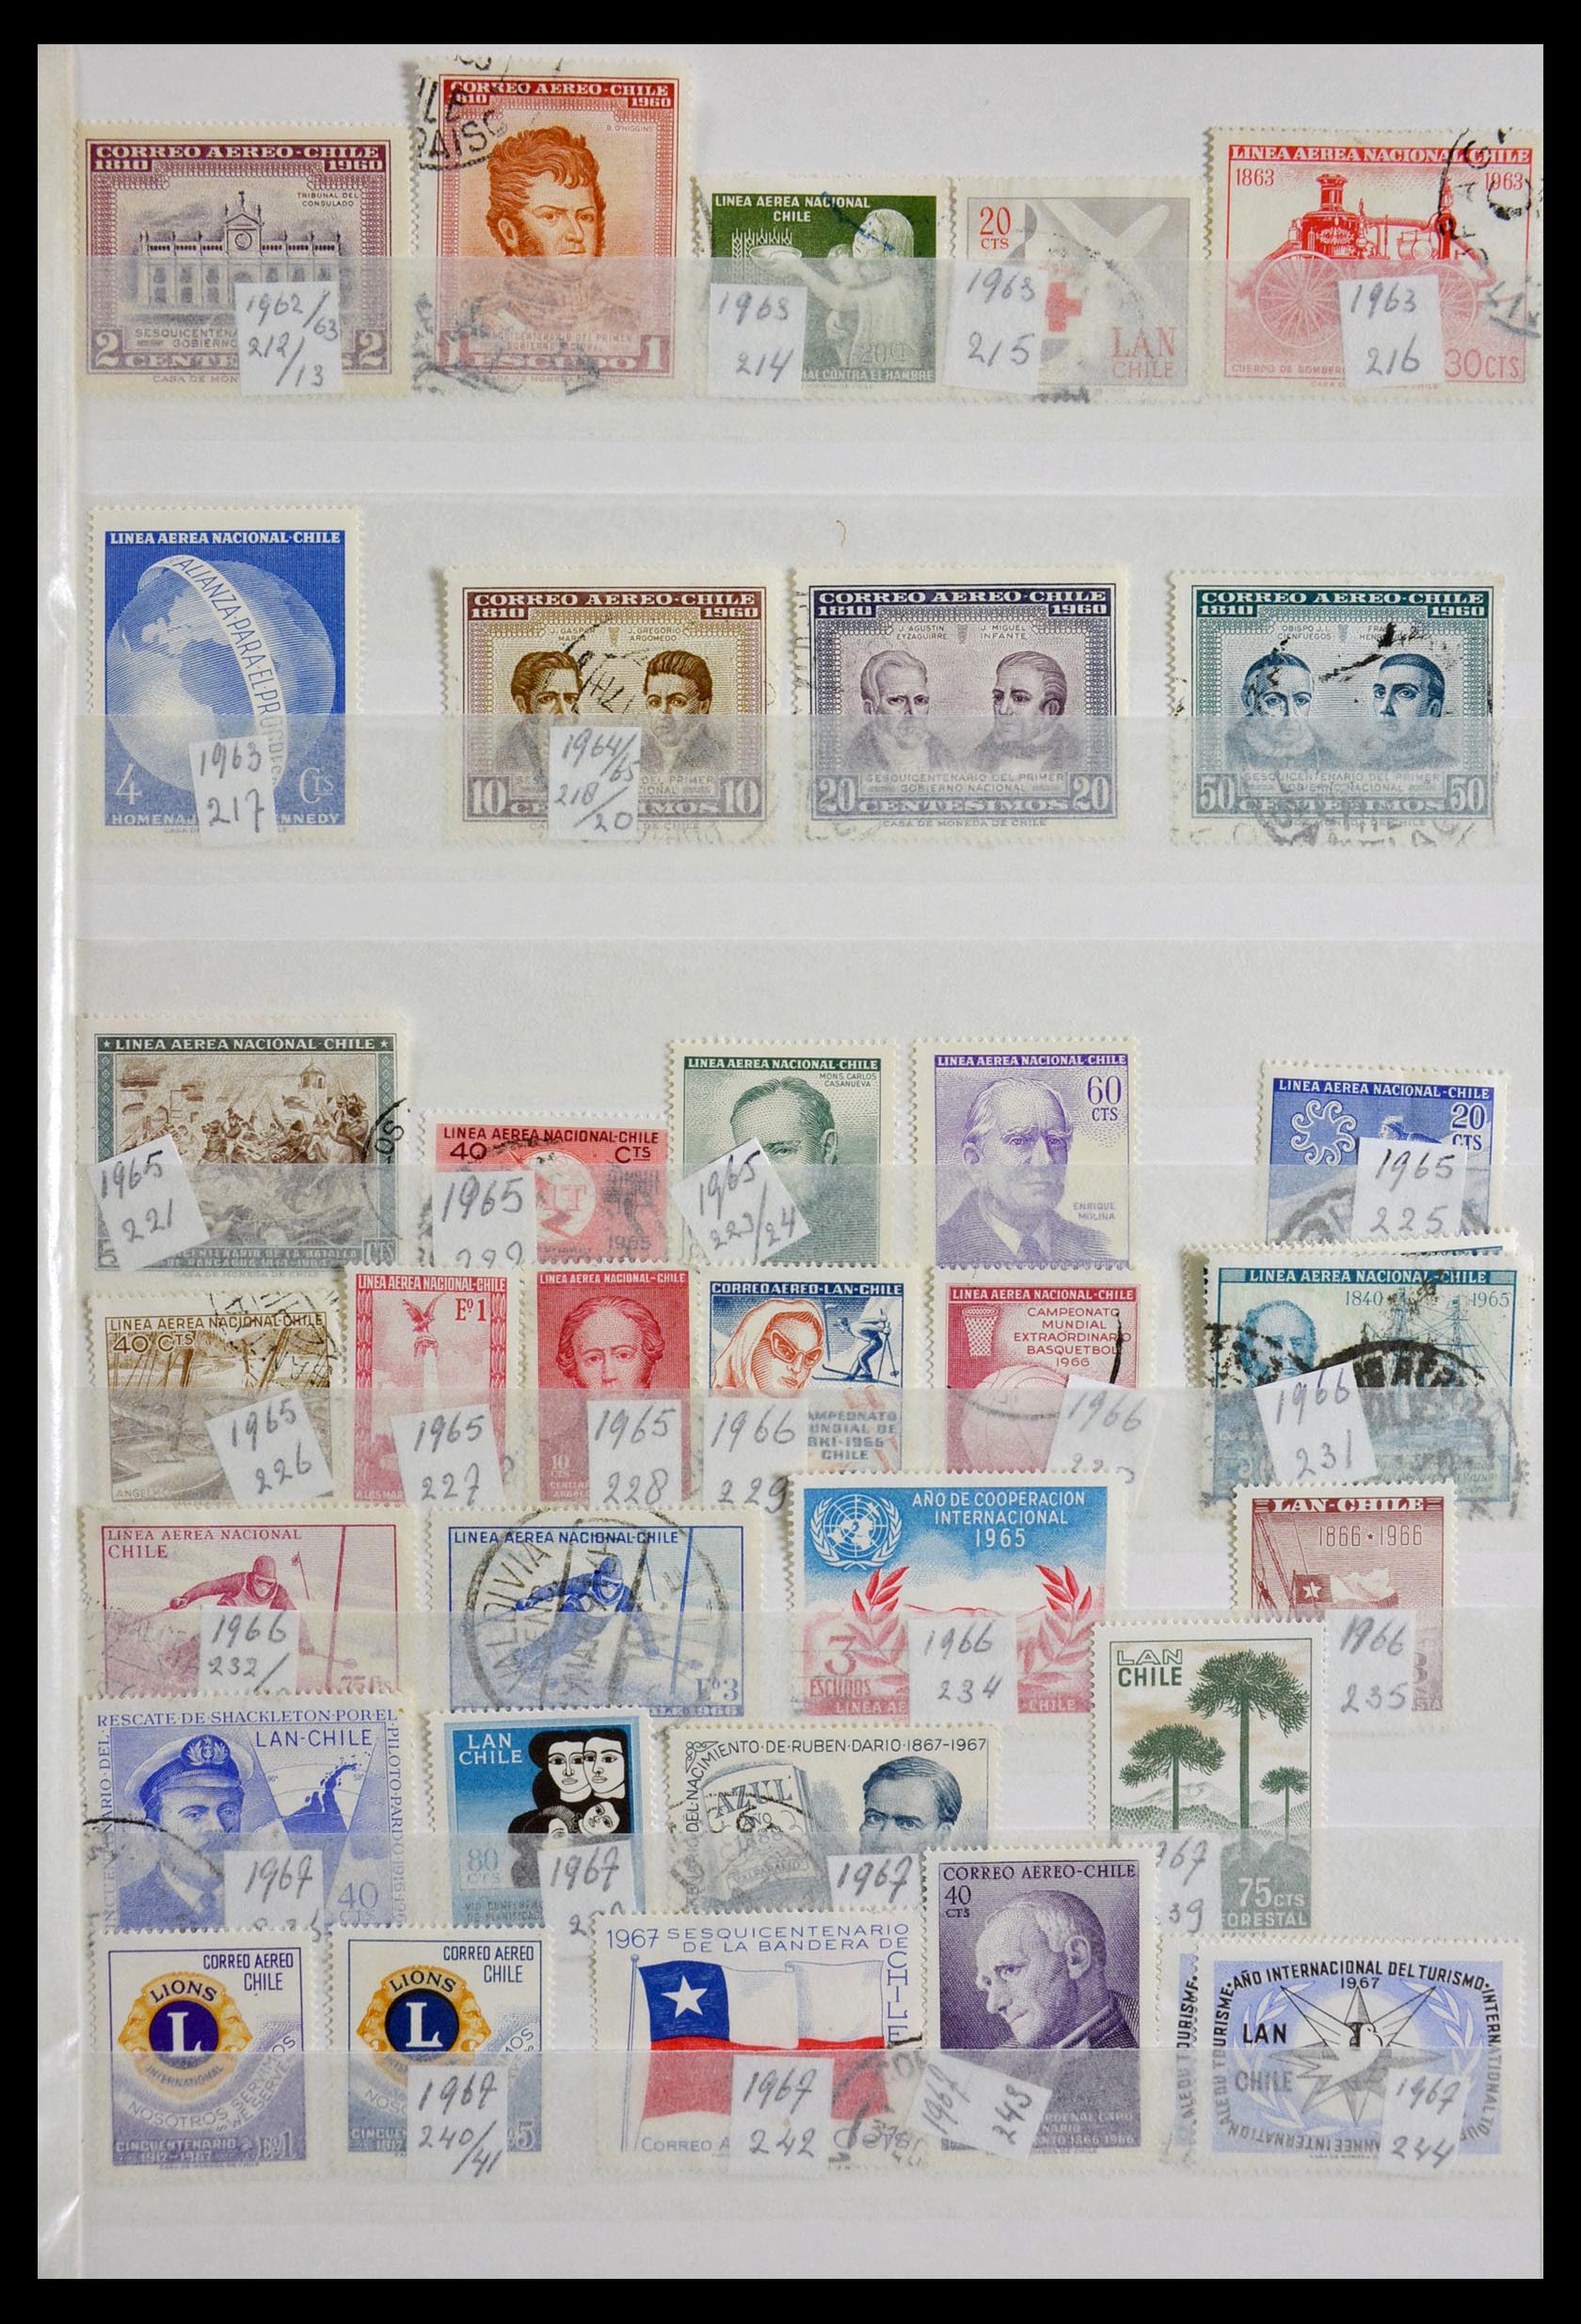 29917 039 - 29917 Latin America airmail stamps.